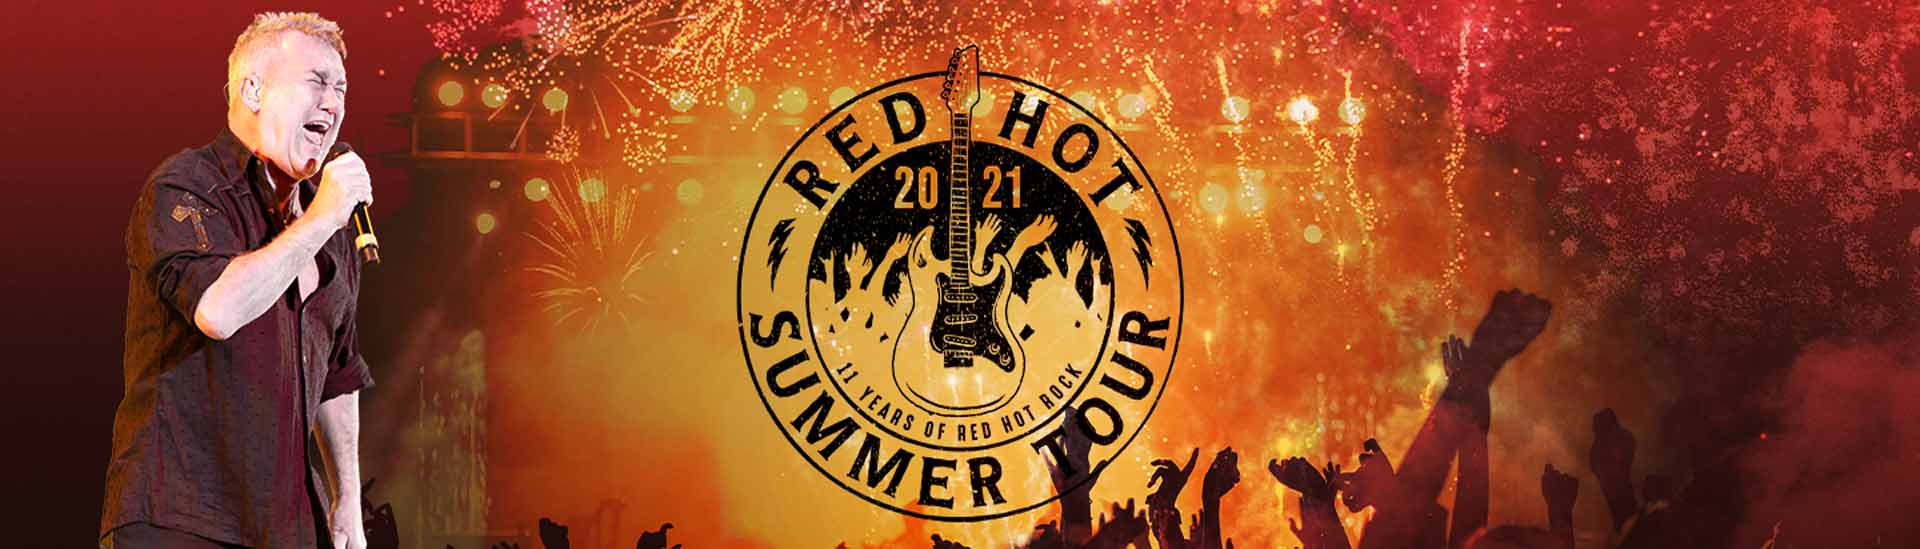 The Red Hot Summer Tour is an annual music festival that brings together some of the hottest rock and pop acts from around the world